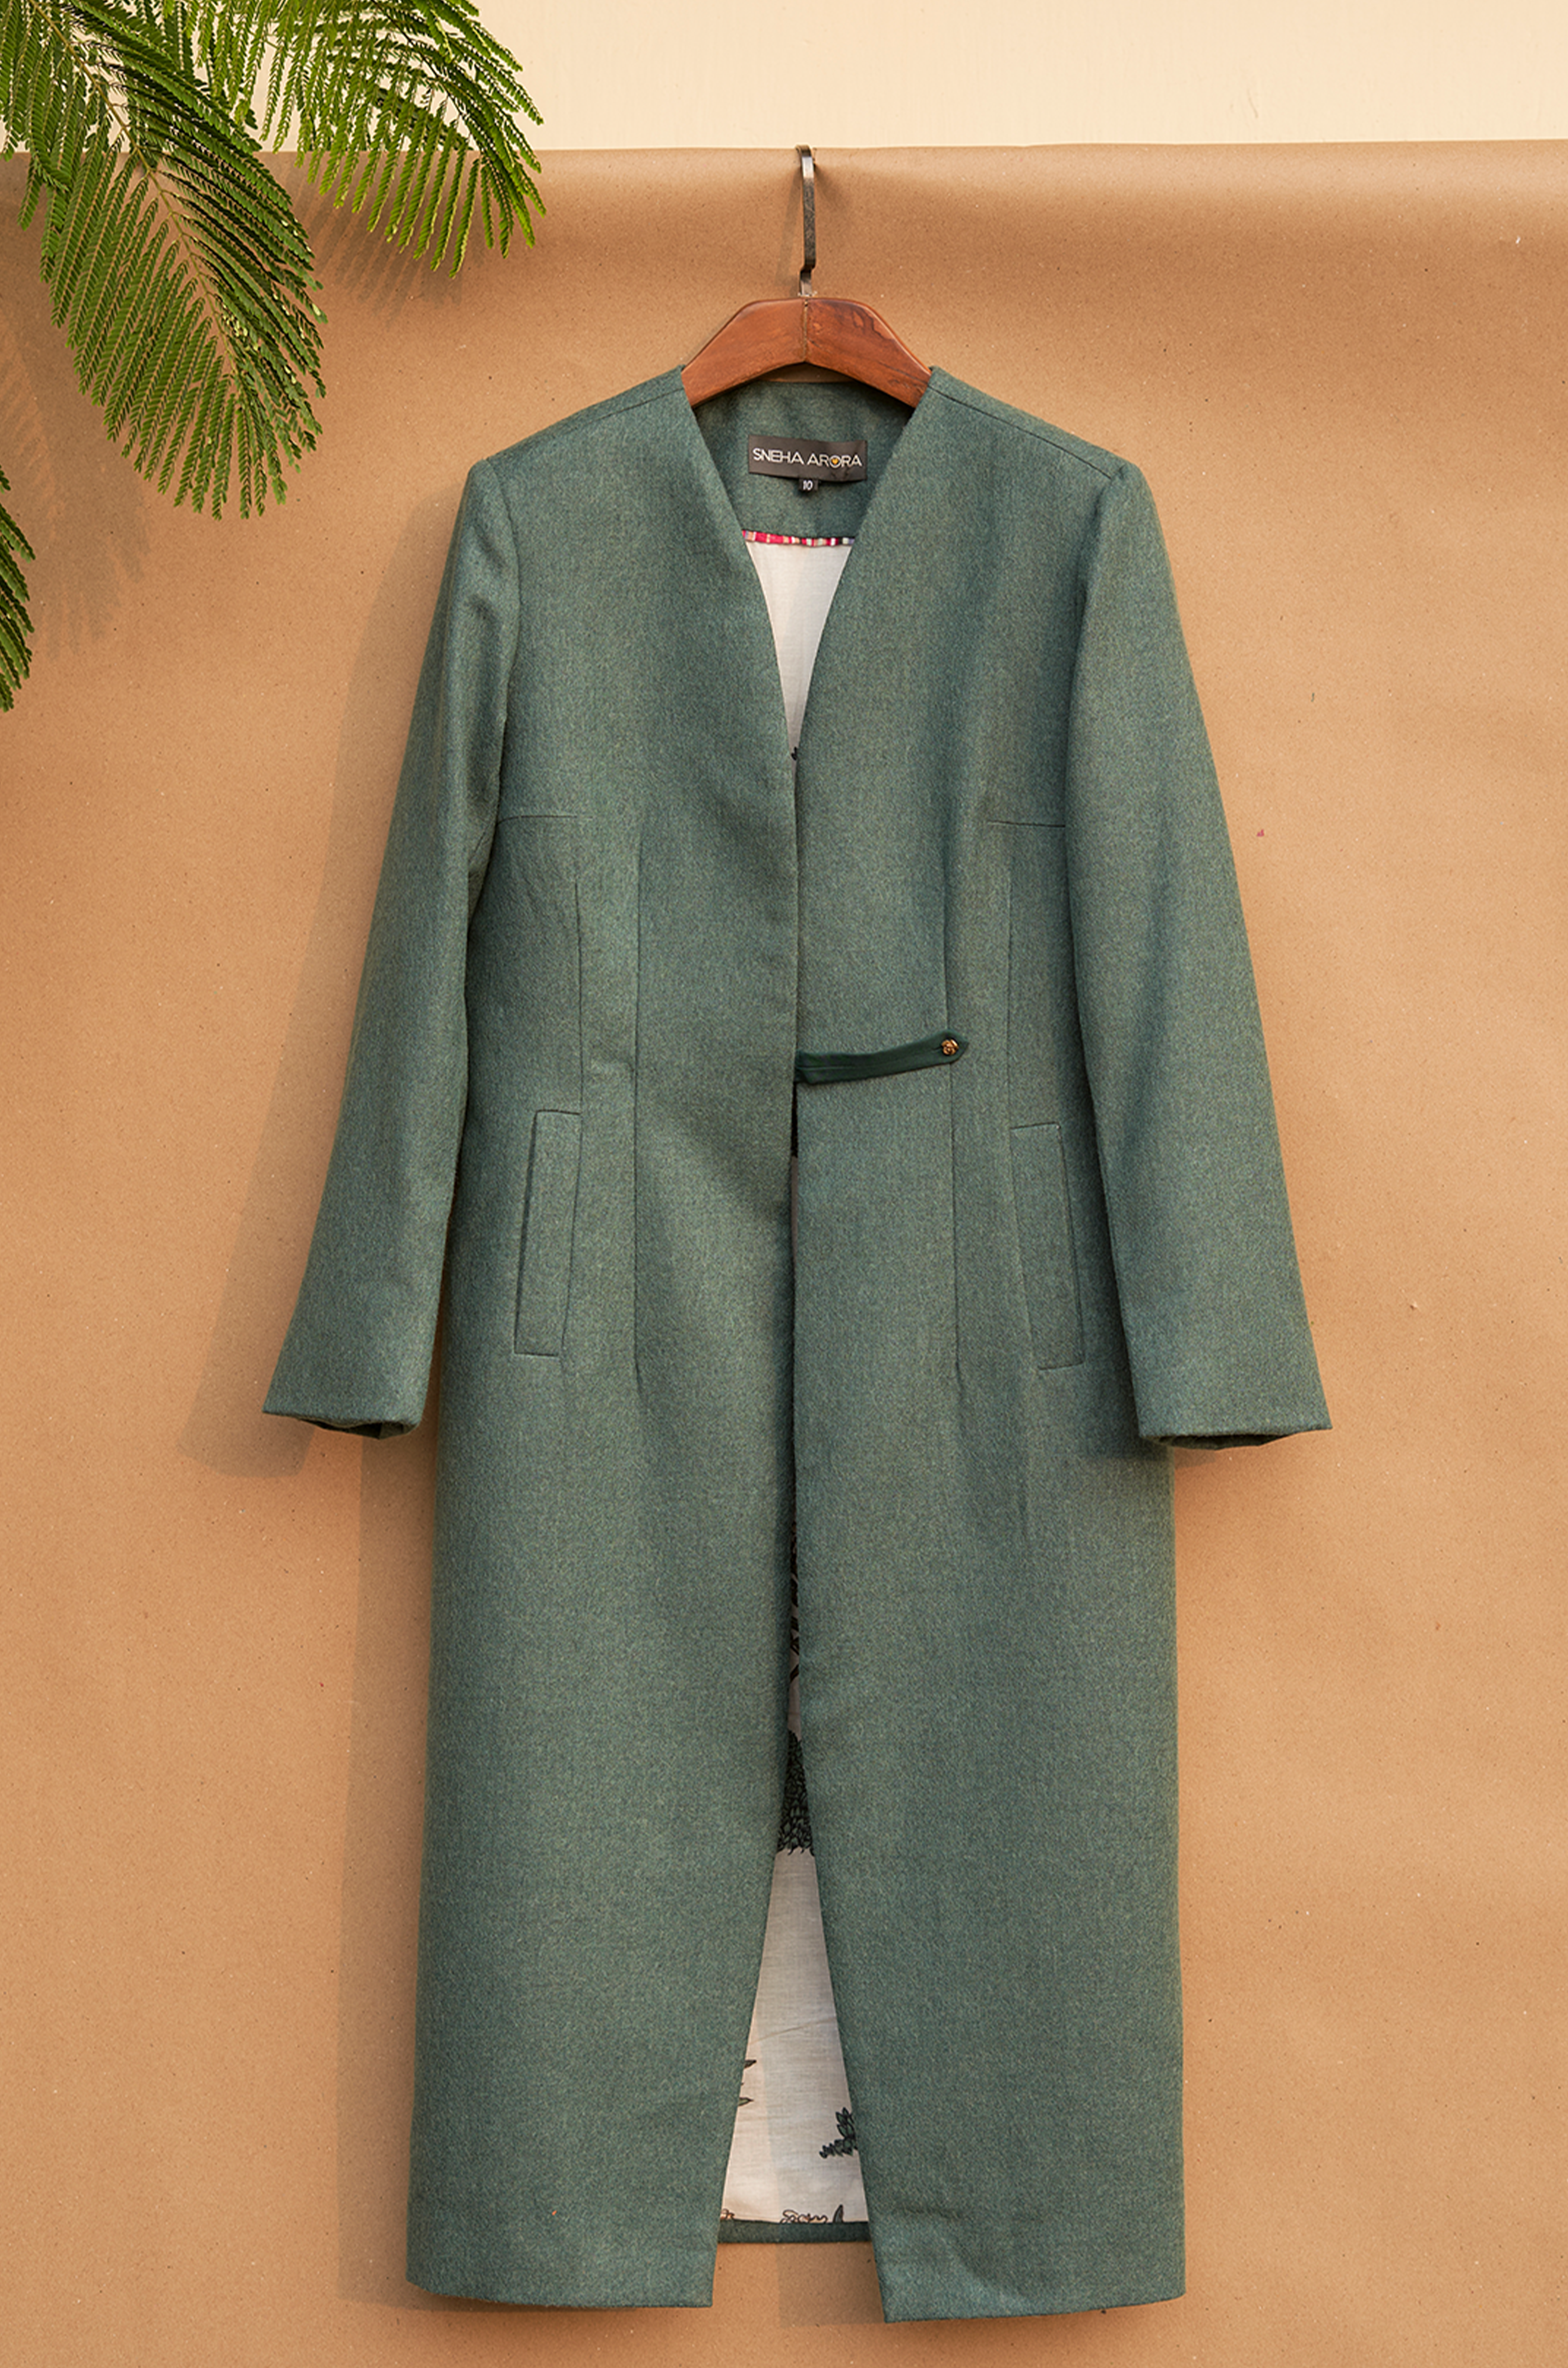 Green fitted jacket with a strap closure